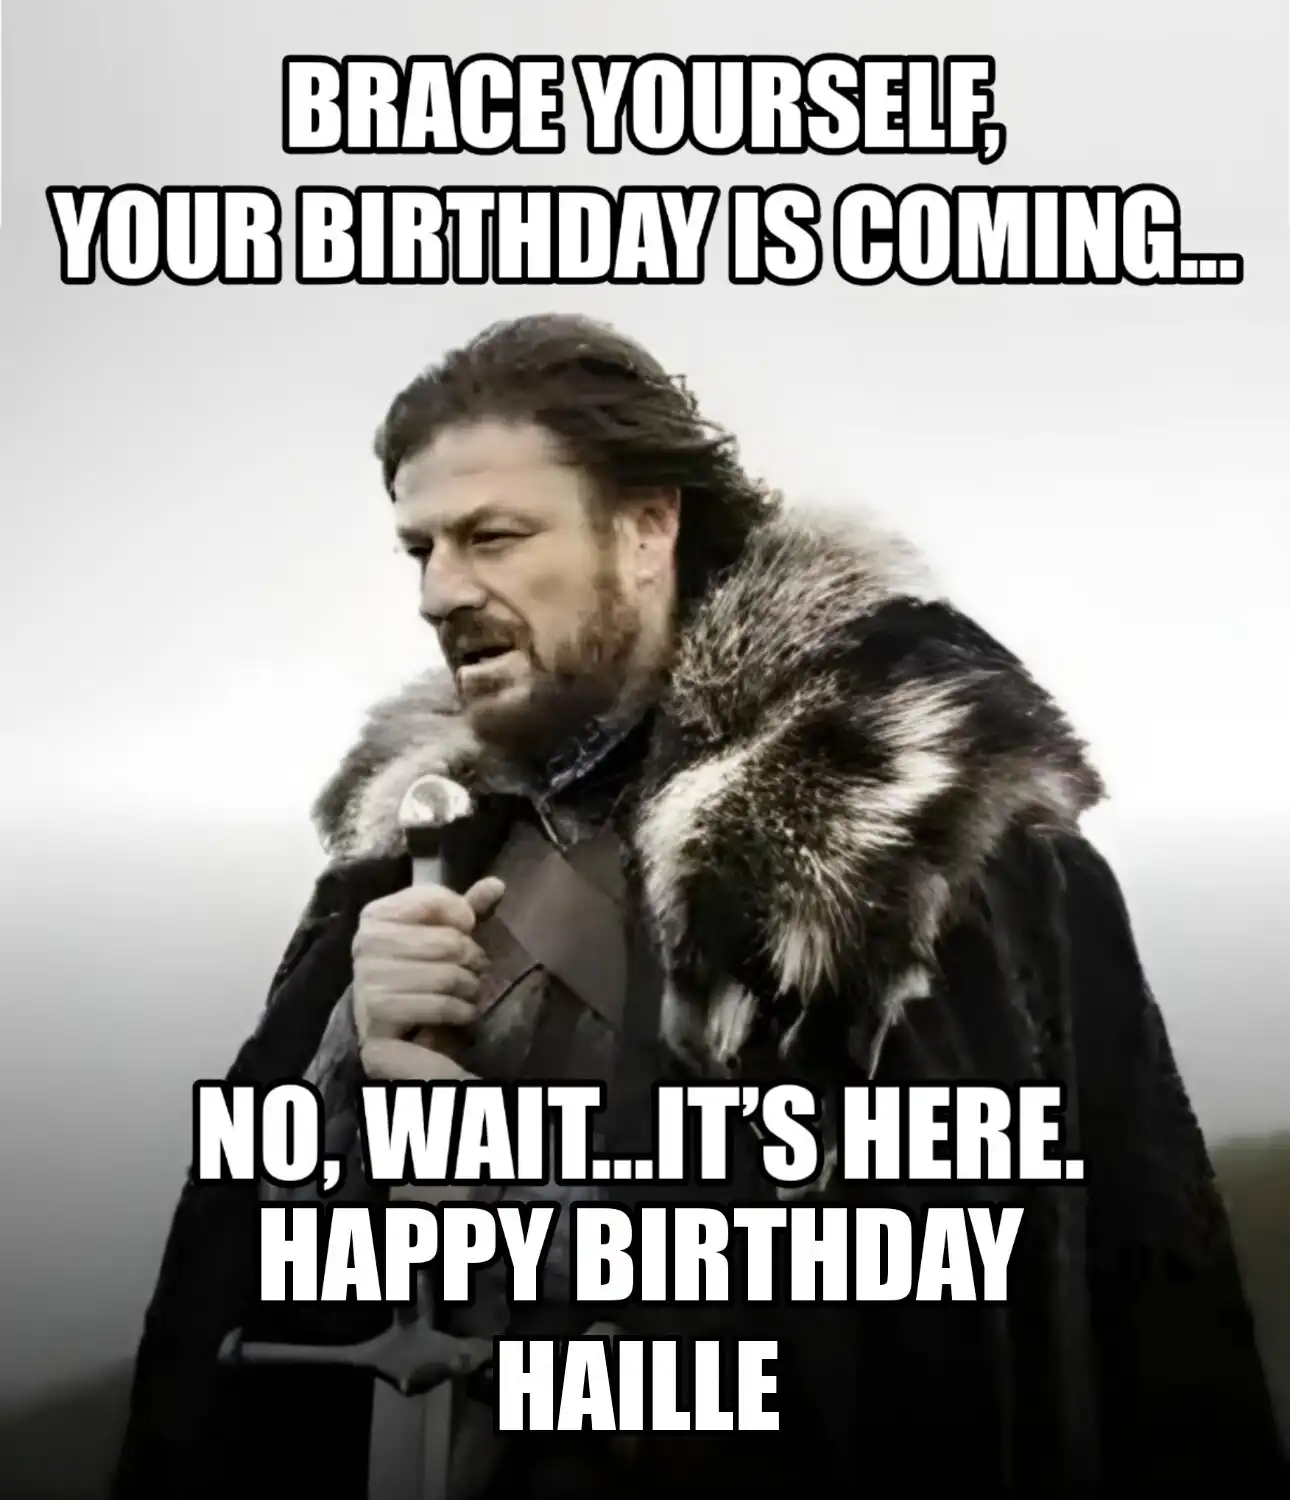 Happy Birthday Haille Brace Yourself Your Birthday Is Coming Meme